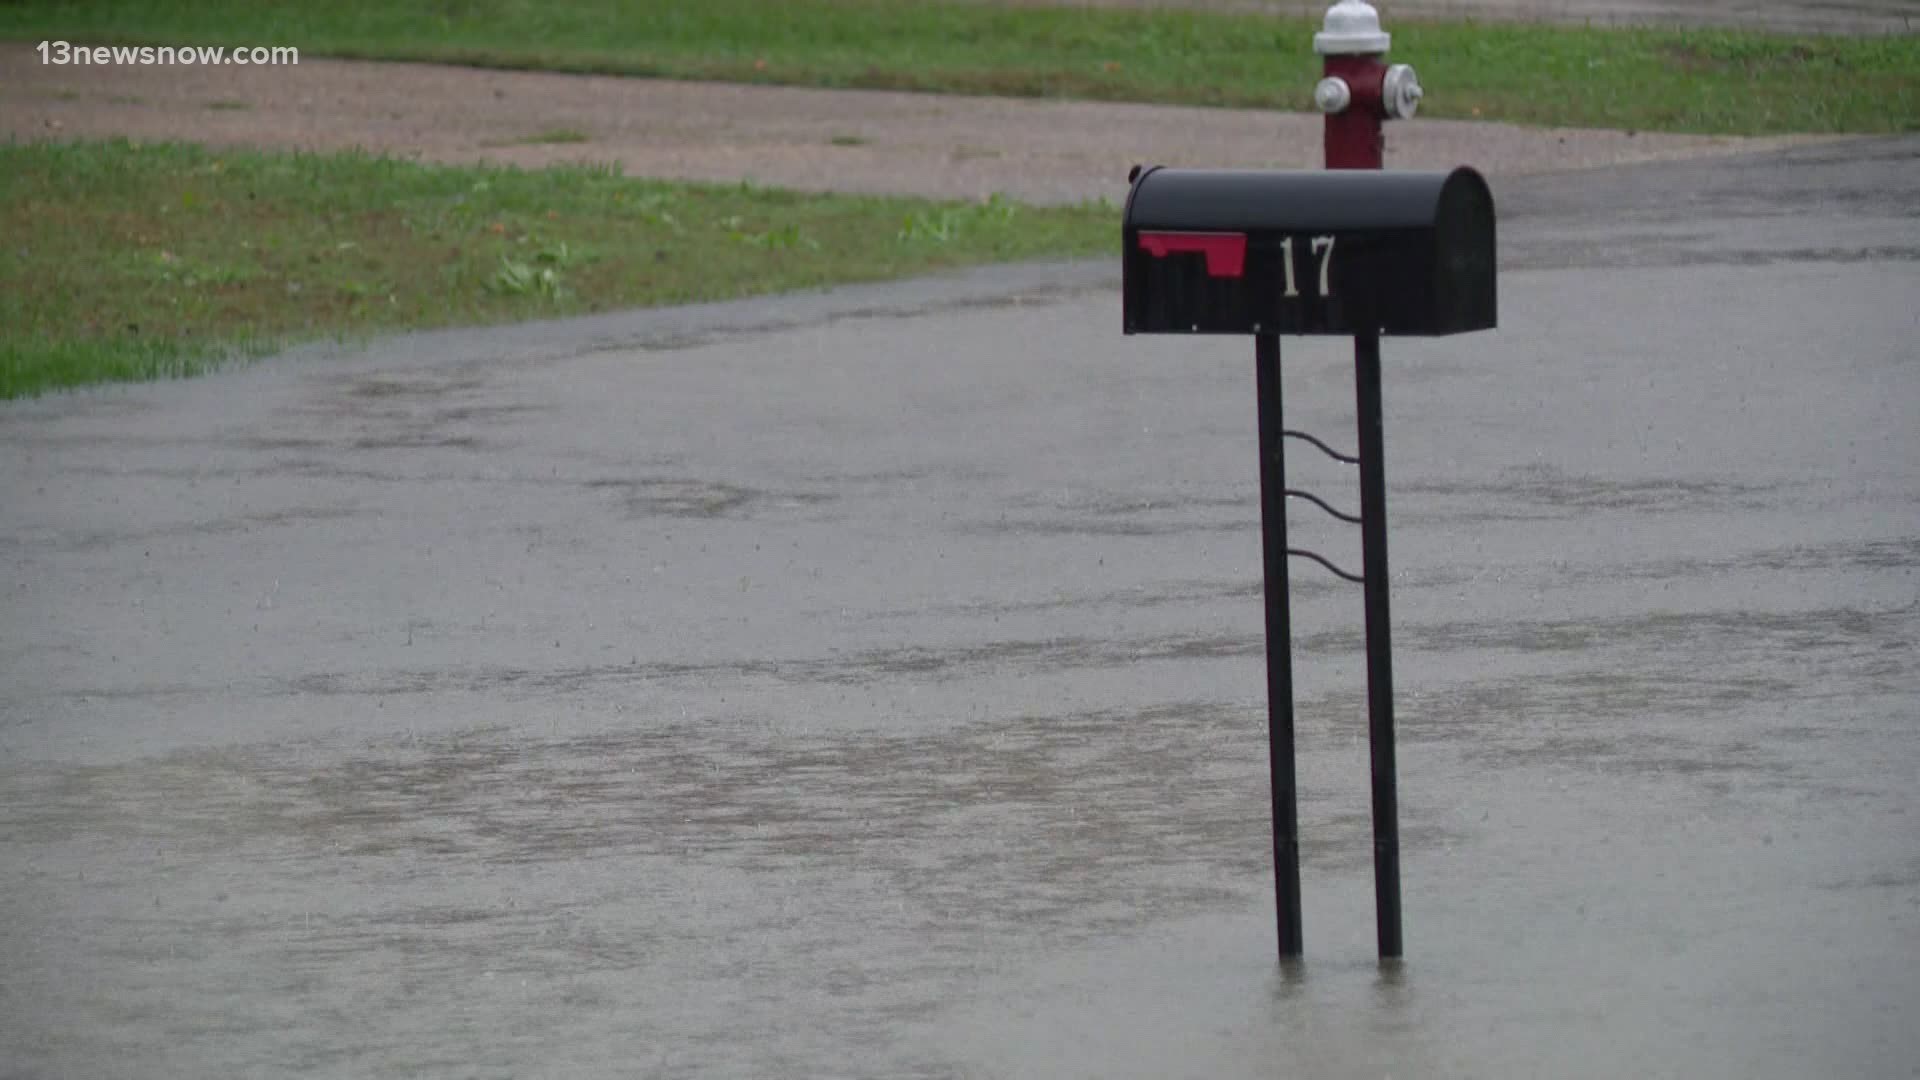 The HOA president is in talks with the city of Hampton to work on easements that could help mitigate their flooding problems.